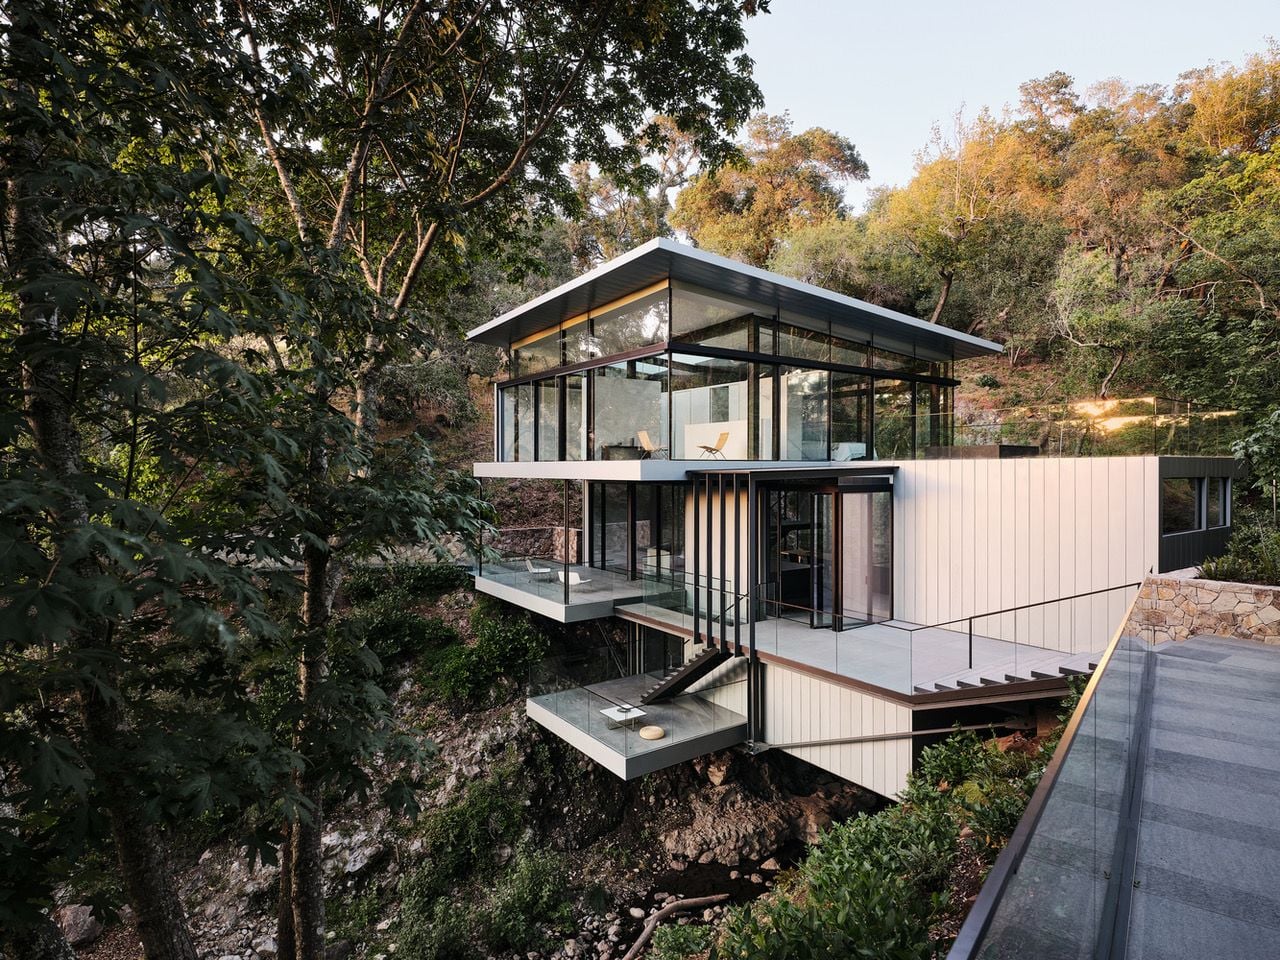 Each level of the Suspension House has its own enclosed glass balcony.